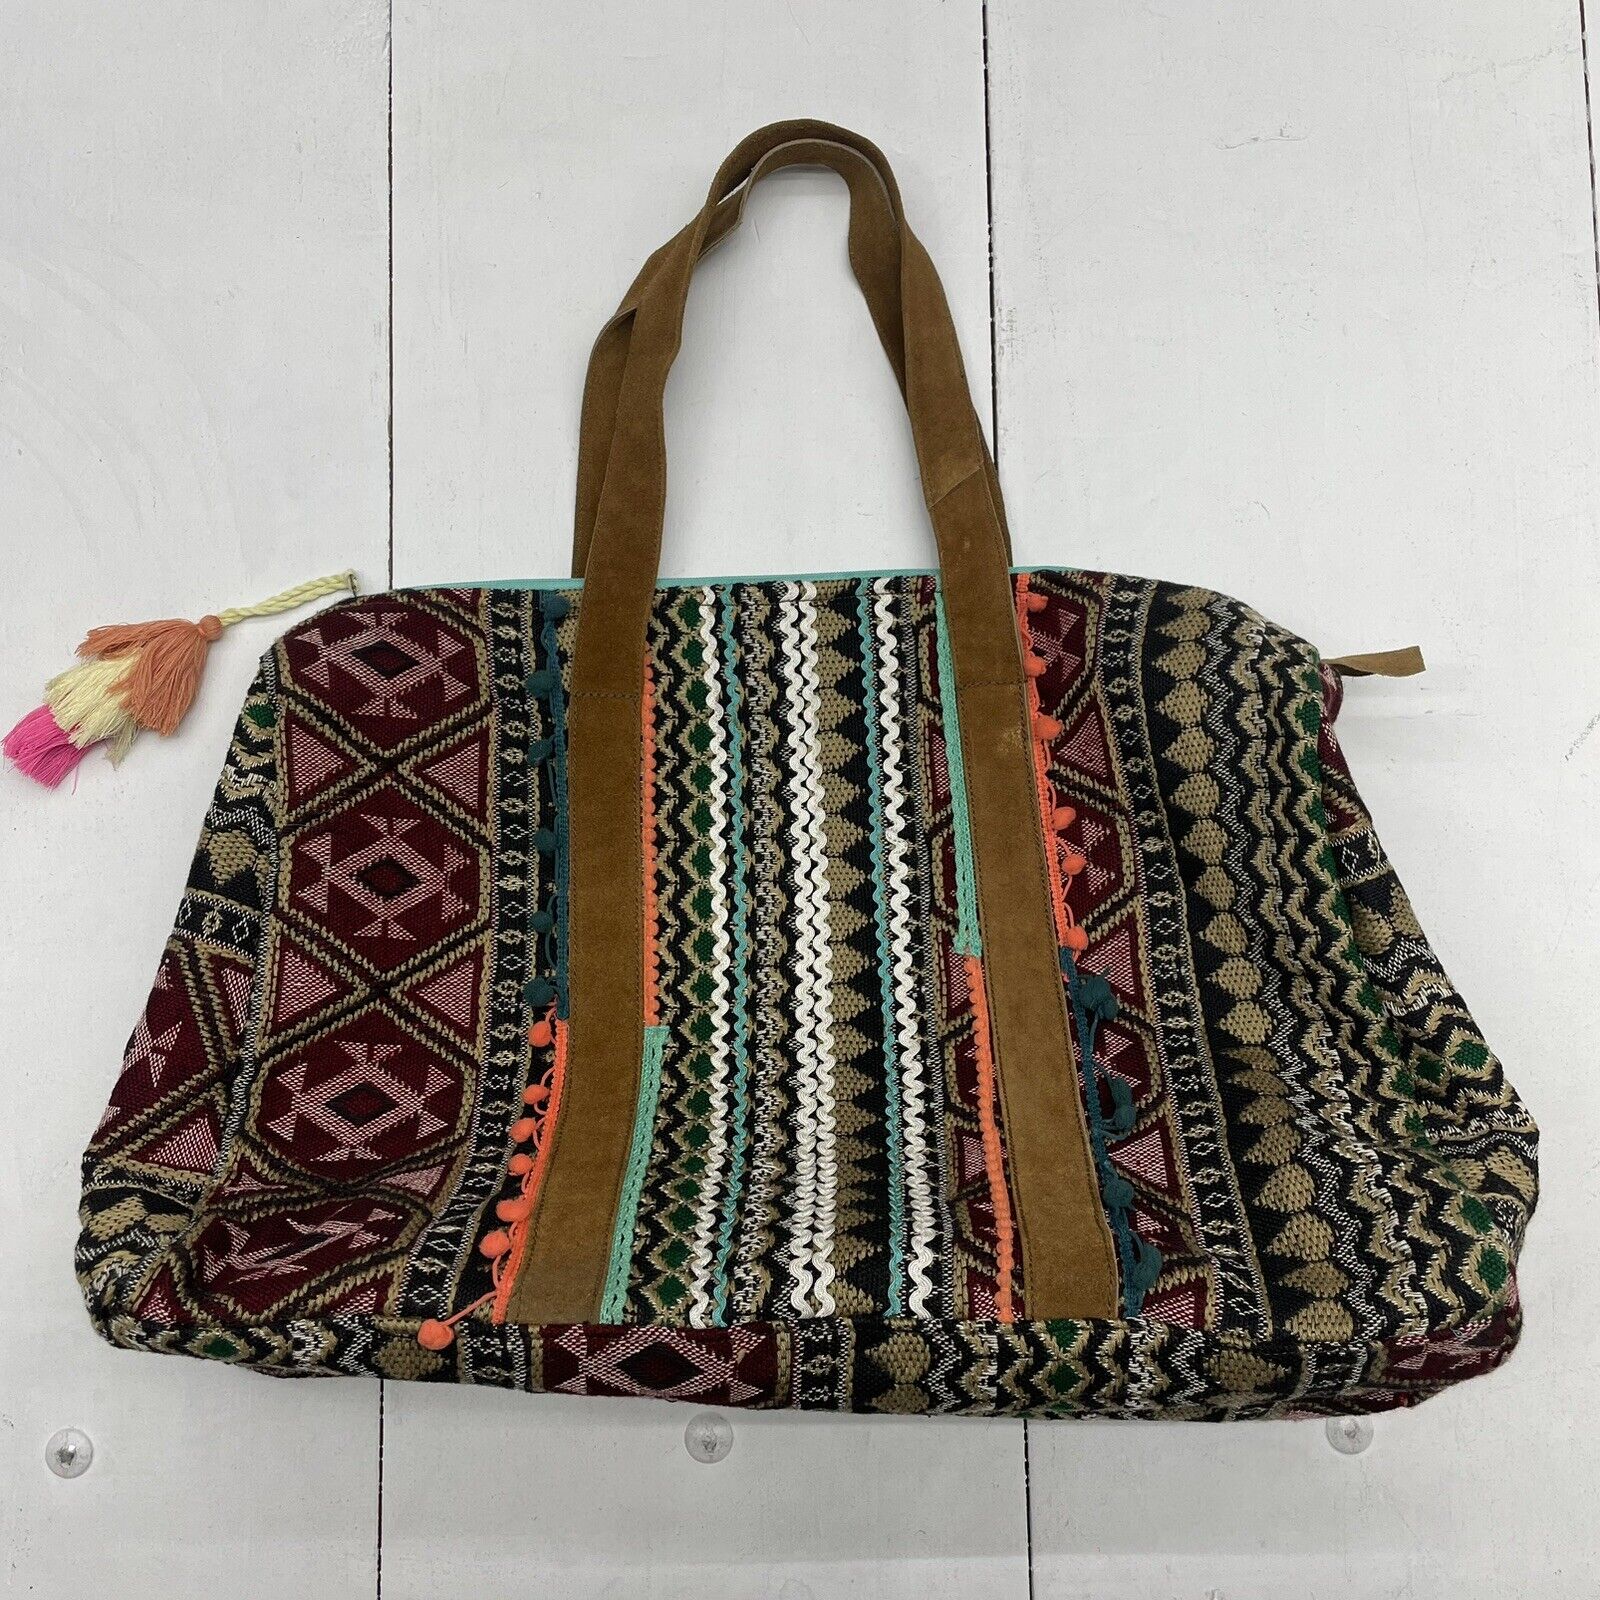 Z&L Europe Multicolored Boho Aztec Weekender Tote Bag New Defects